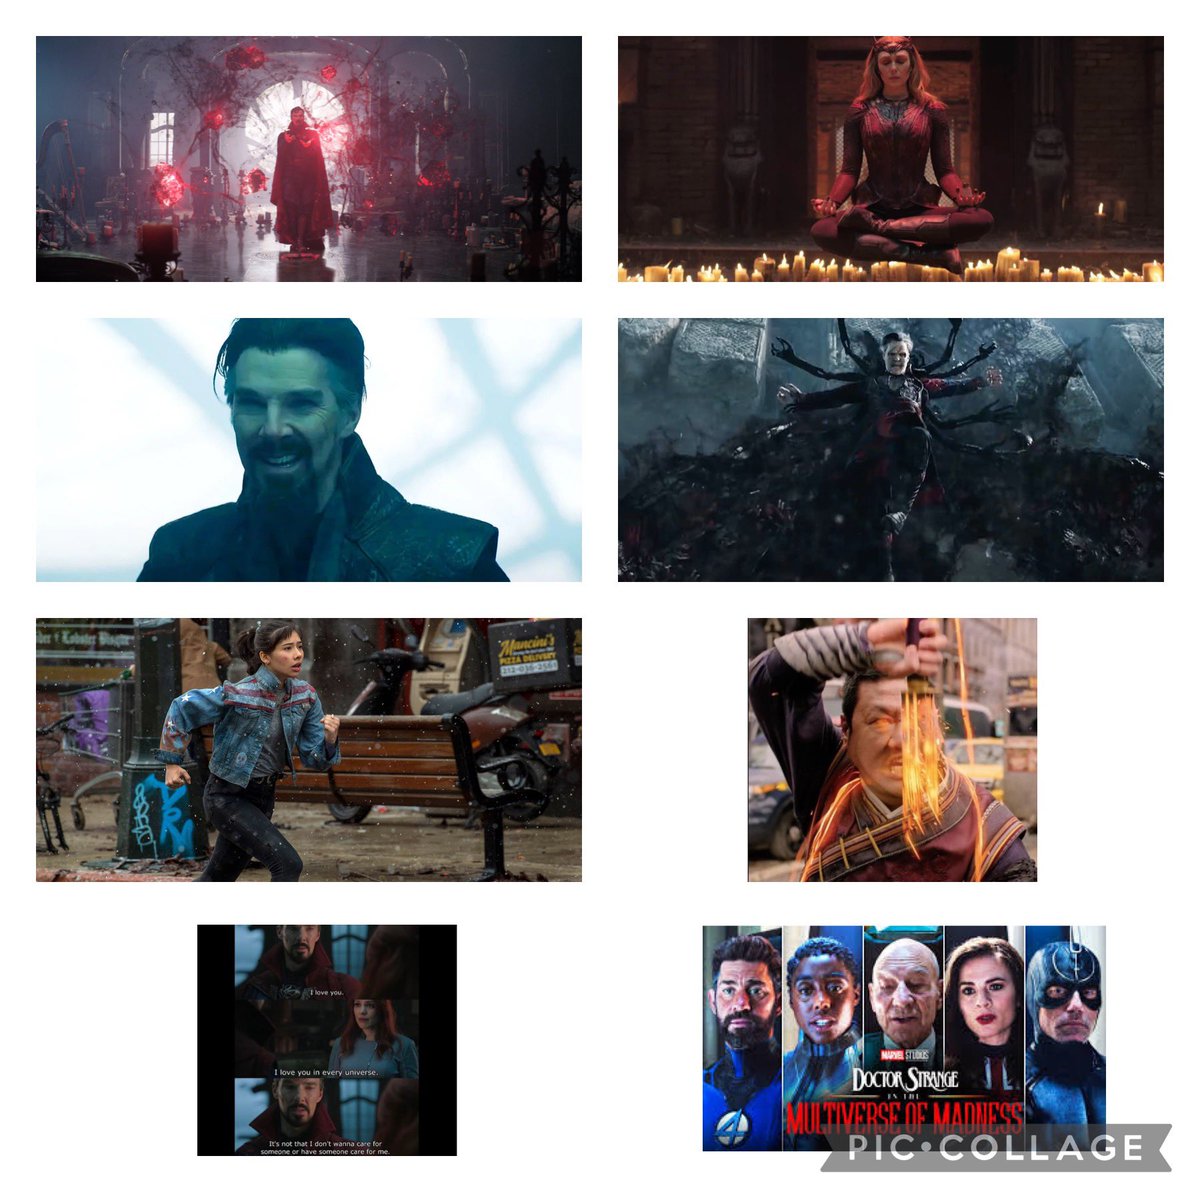 Happy 1st anniversary to Doctor Strange in the Multiverse of Madness 😍🥳 #Marvel #MarvelStudios #DoctorStrangeintheMultiverseofMadness #MultiverseofMadness